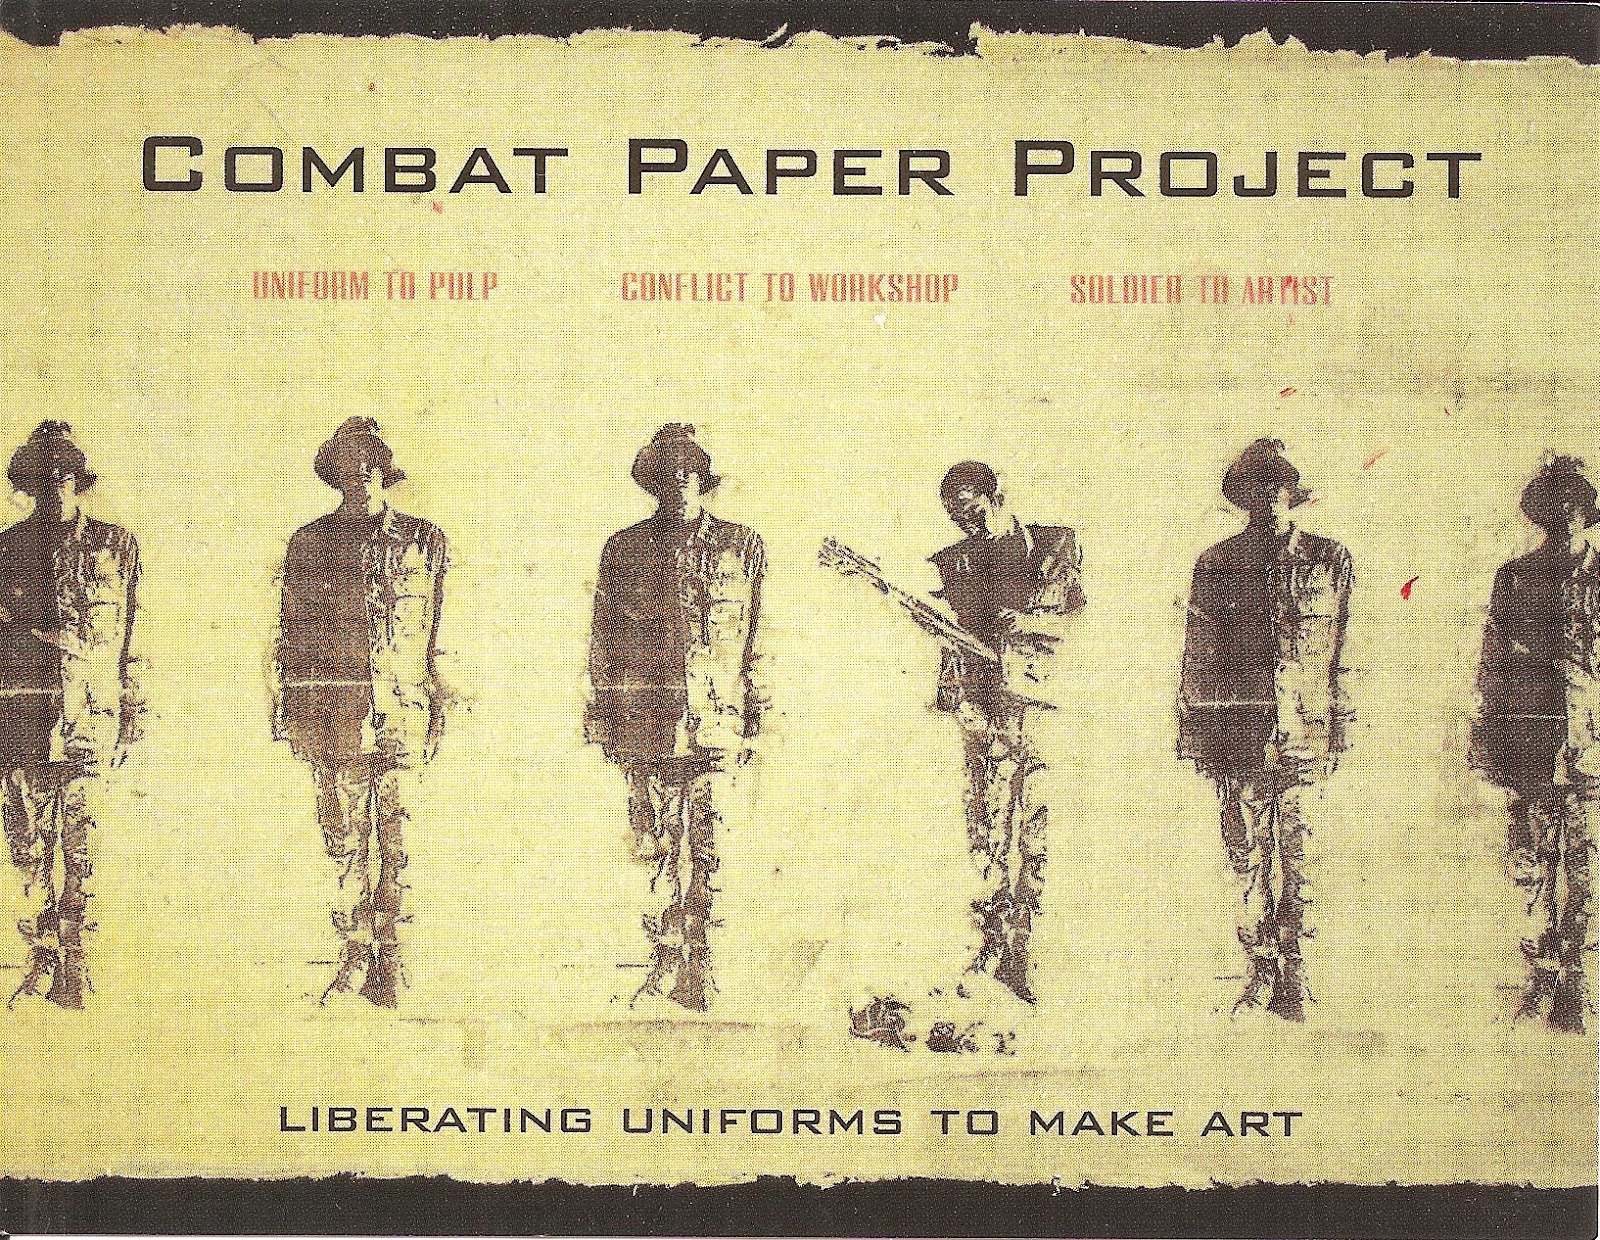 ... February 2013 Production!: Wounded Worrior Project and Combat Paper